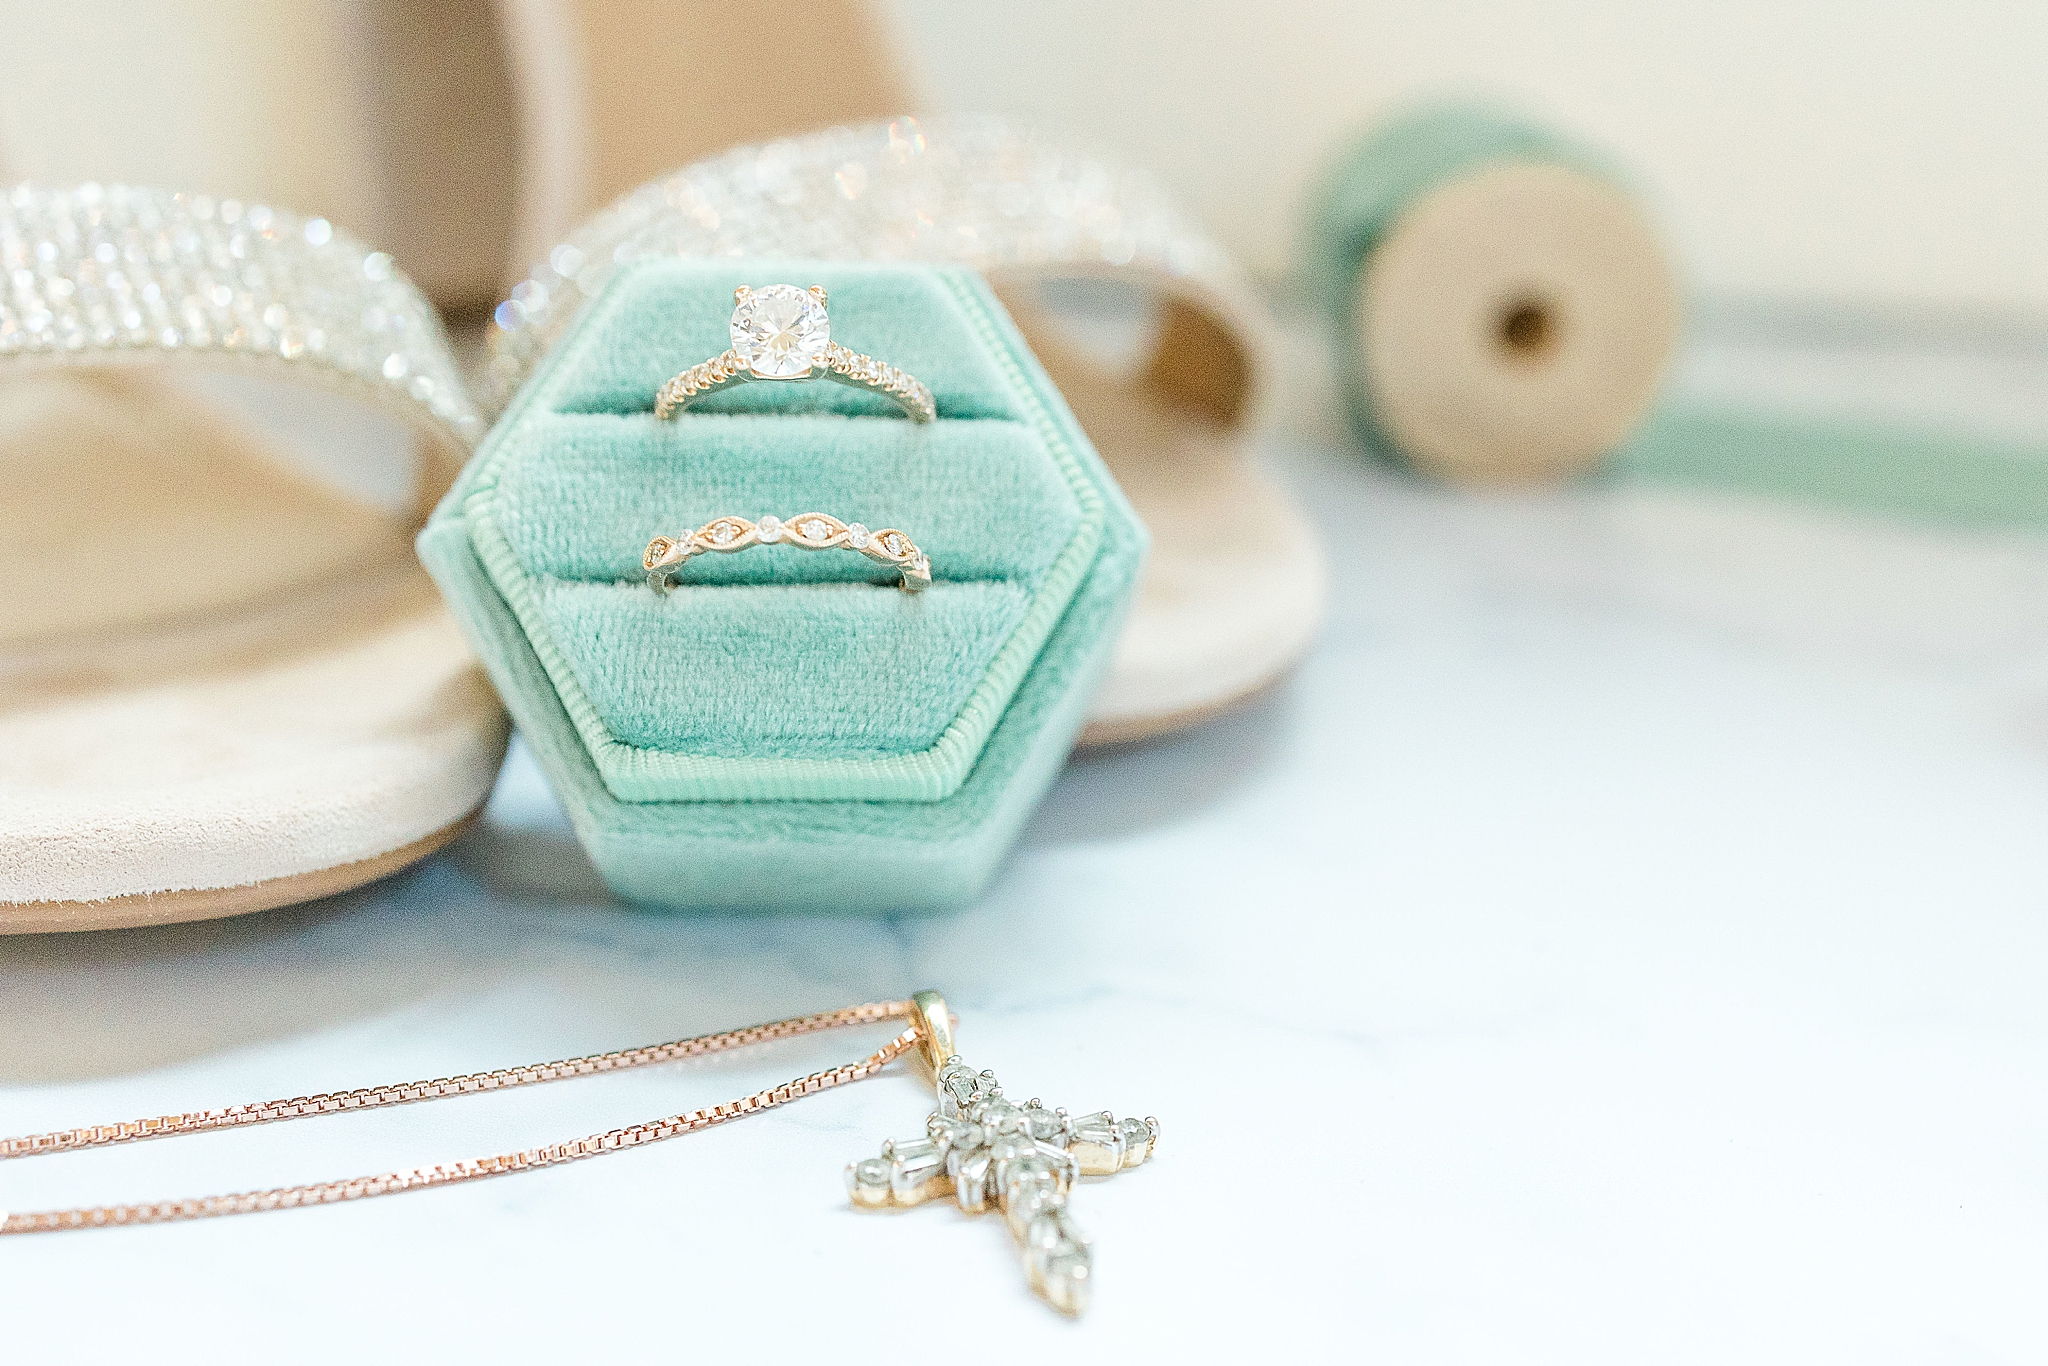 bride's wedding bands in teal box